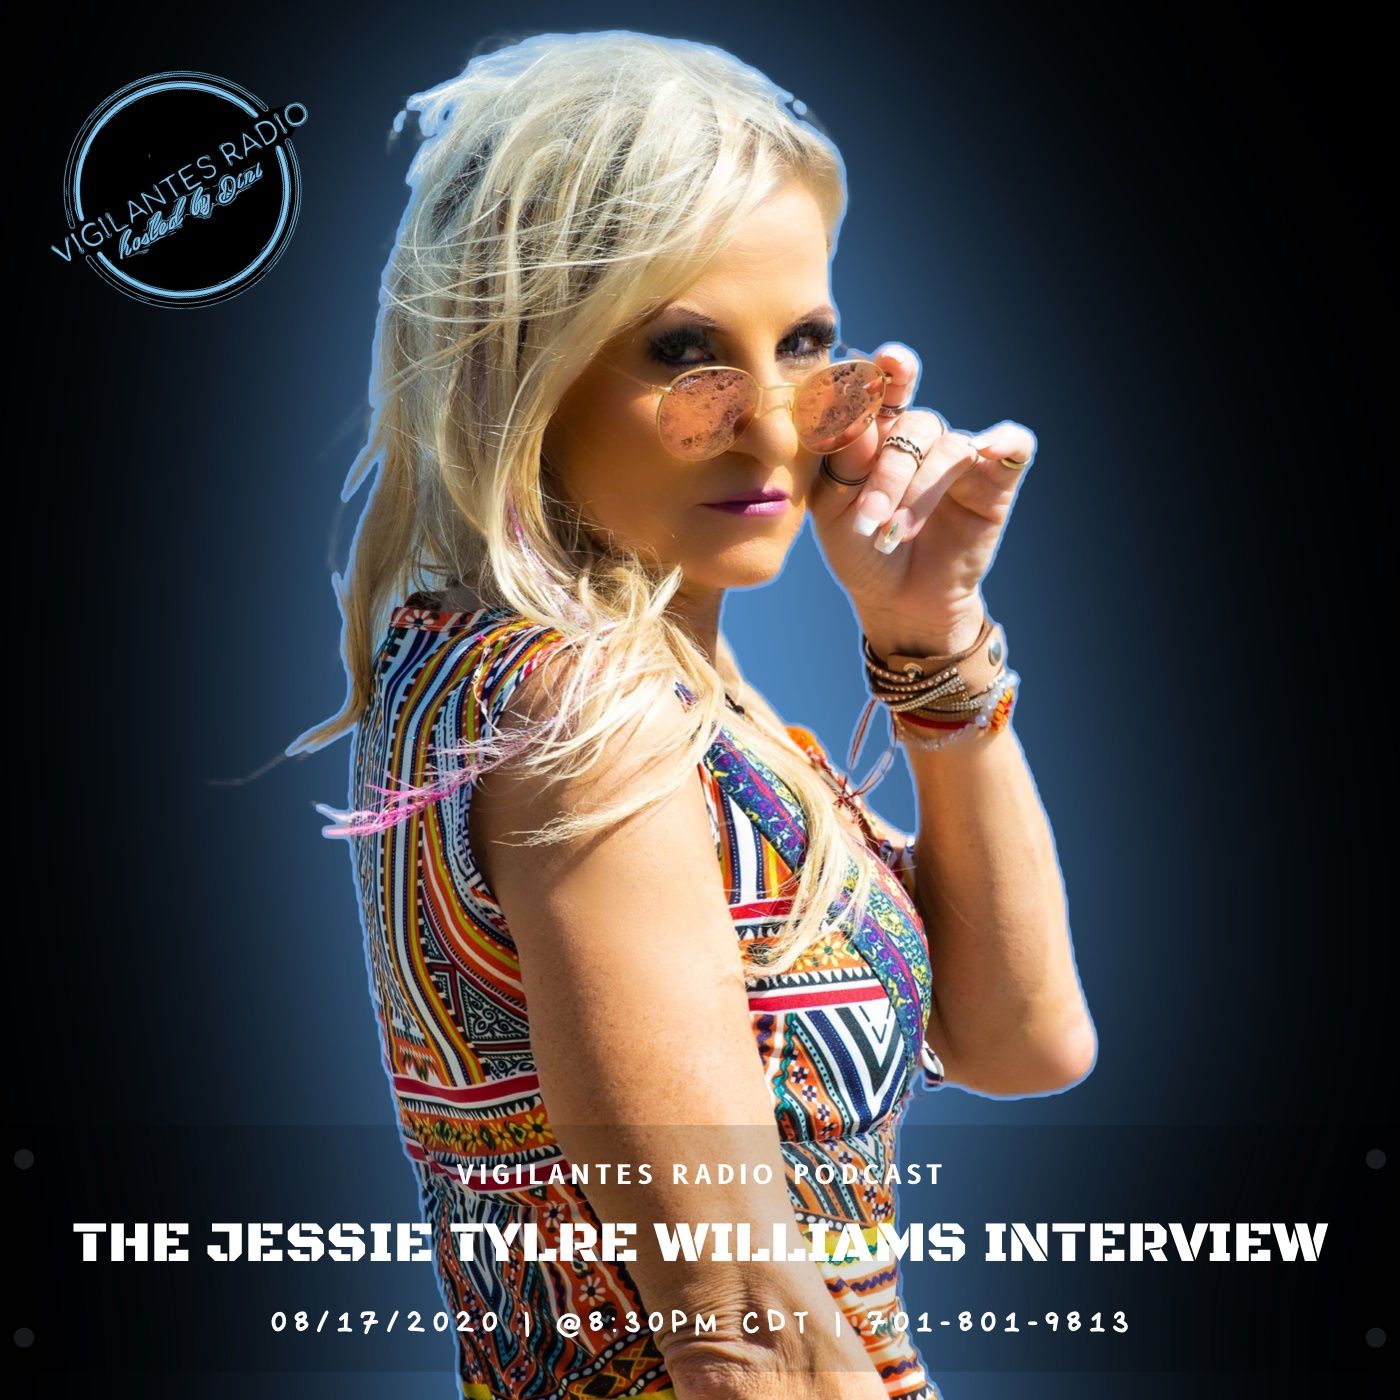 The Jessie Tylre Williams Interview. Image